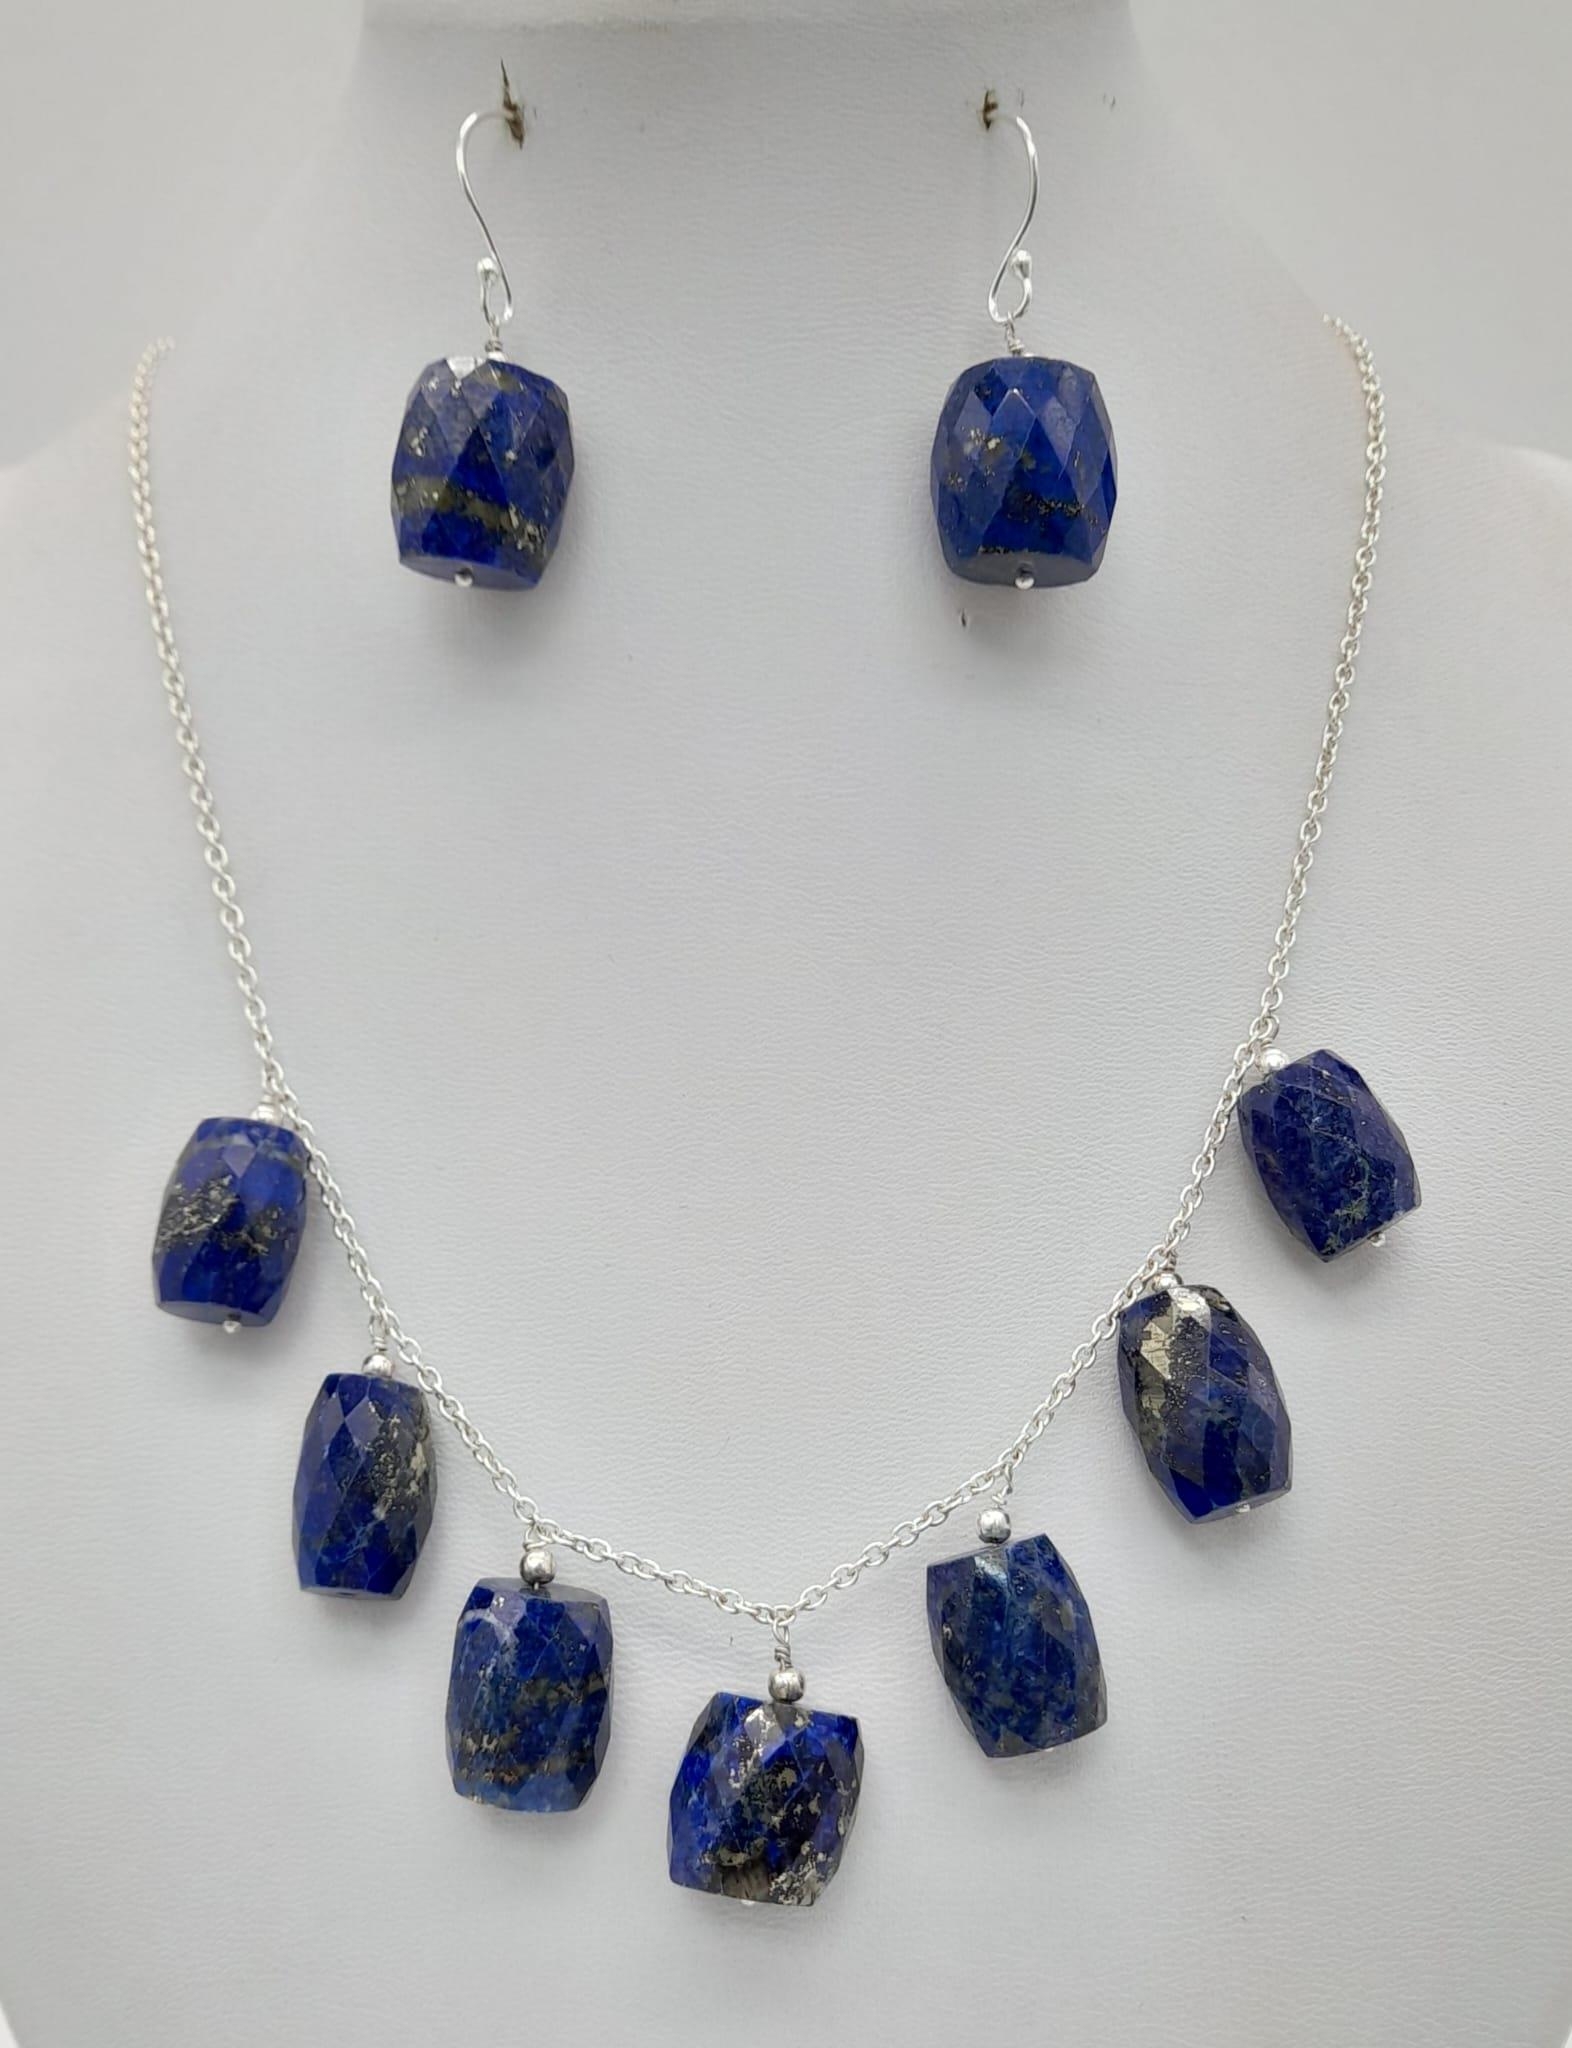 A 220ct Lapis Lazuli Necklace with a Matching Pair of Barrel Earrings set in 925 Silver. 42cm - - Bild 2 aus 3